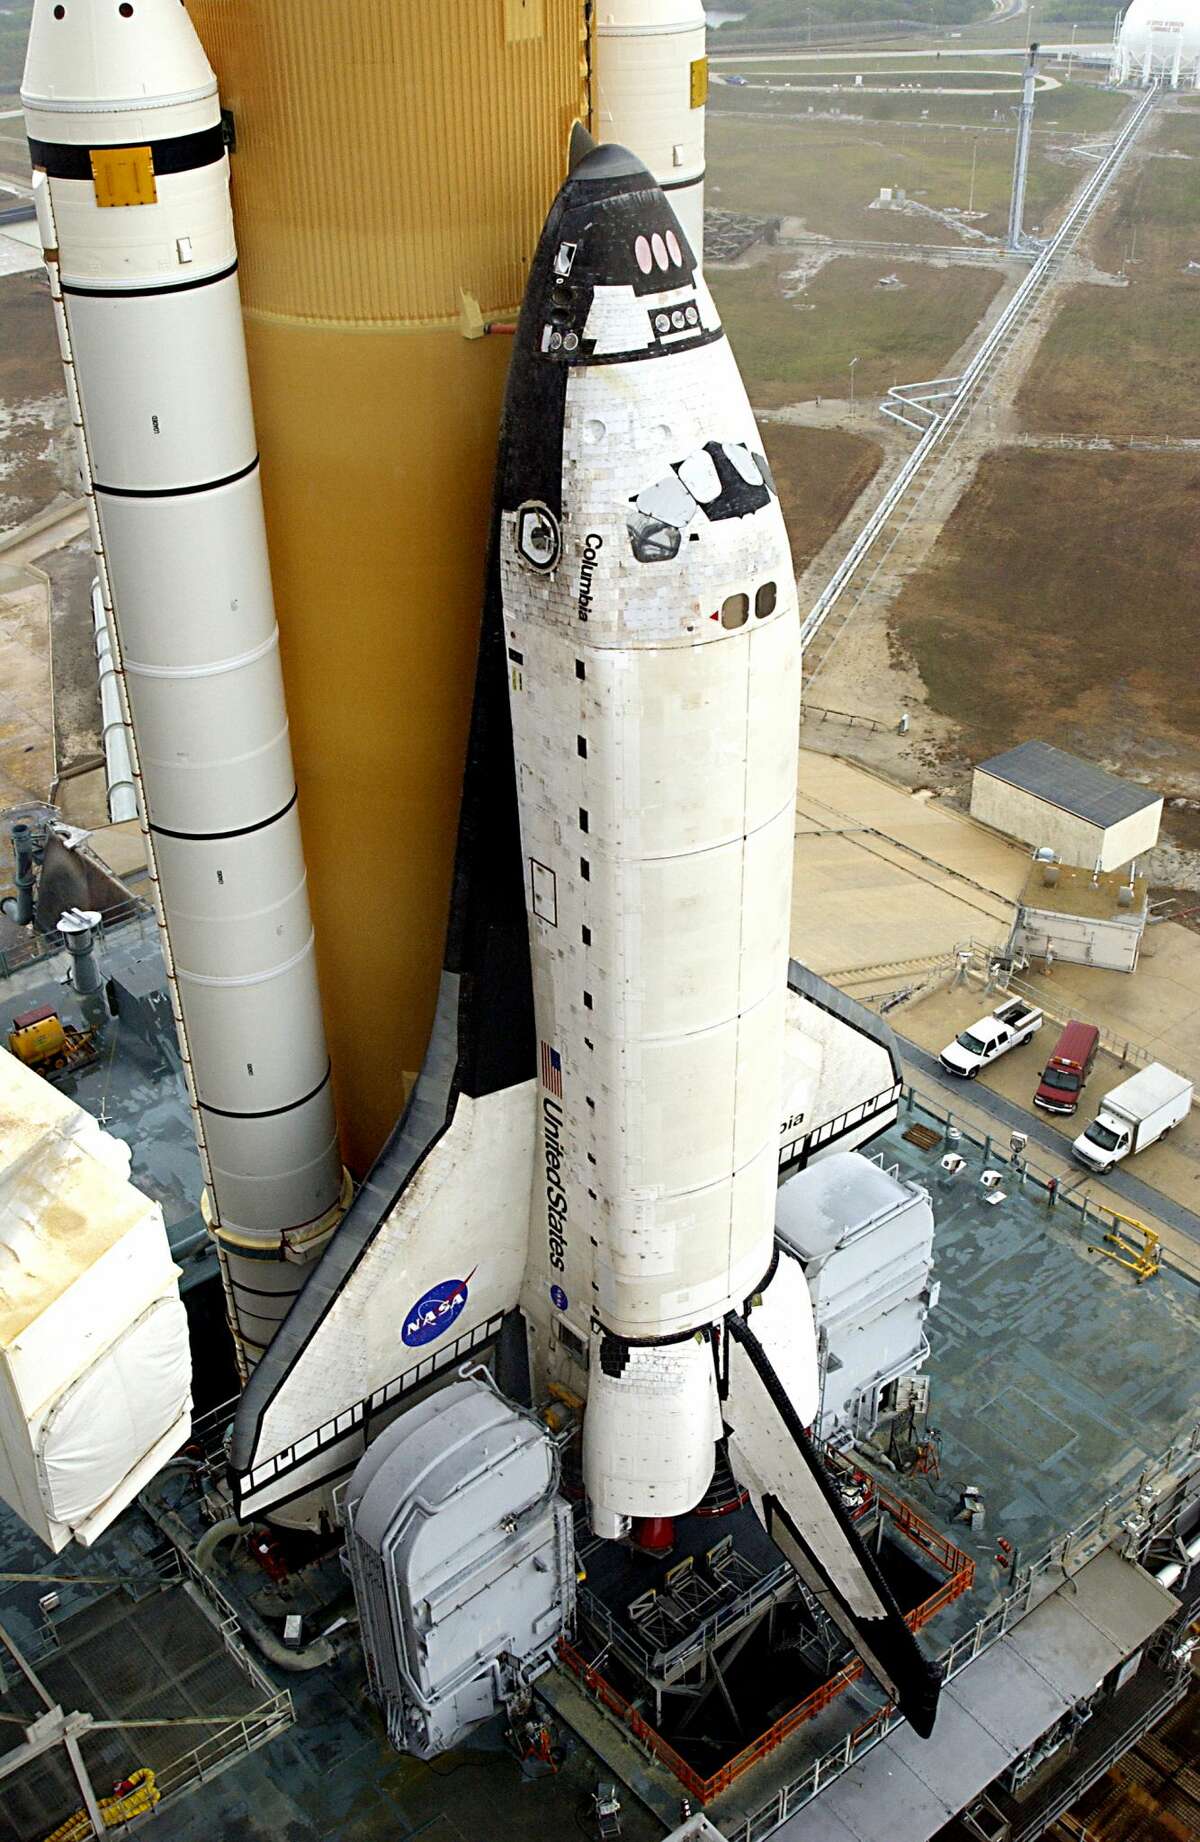 space shuttle columbia